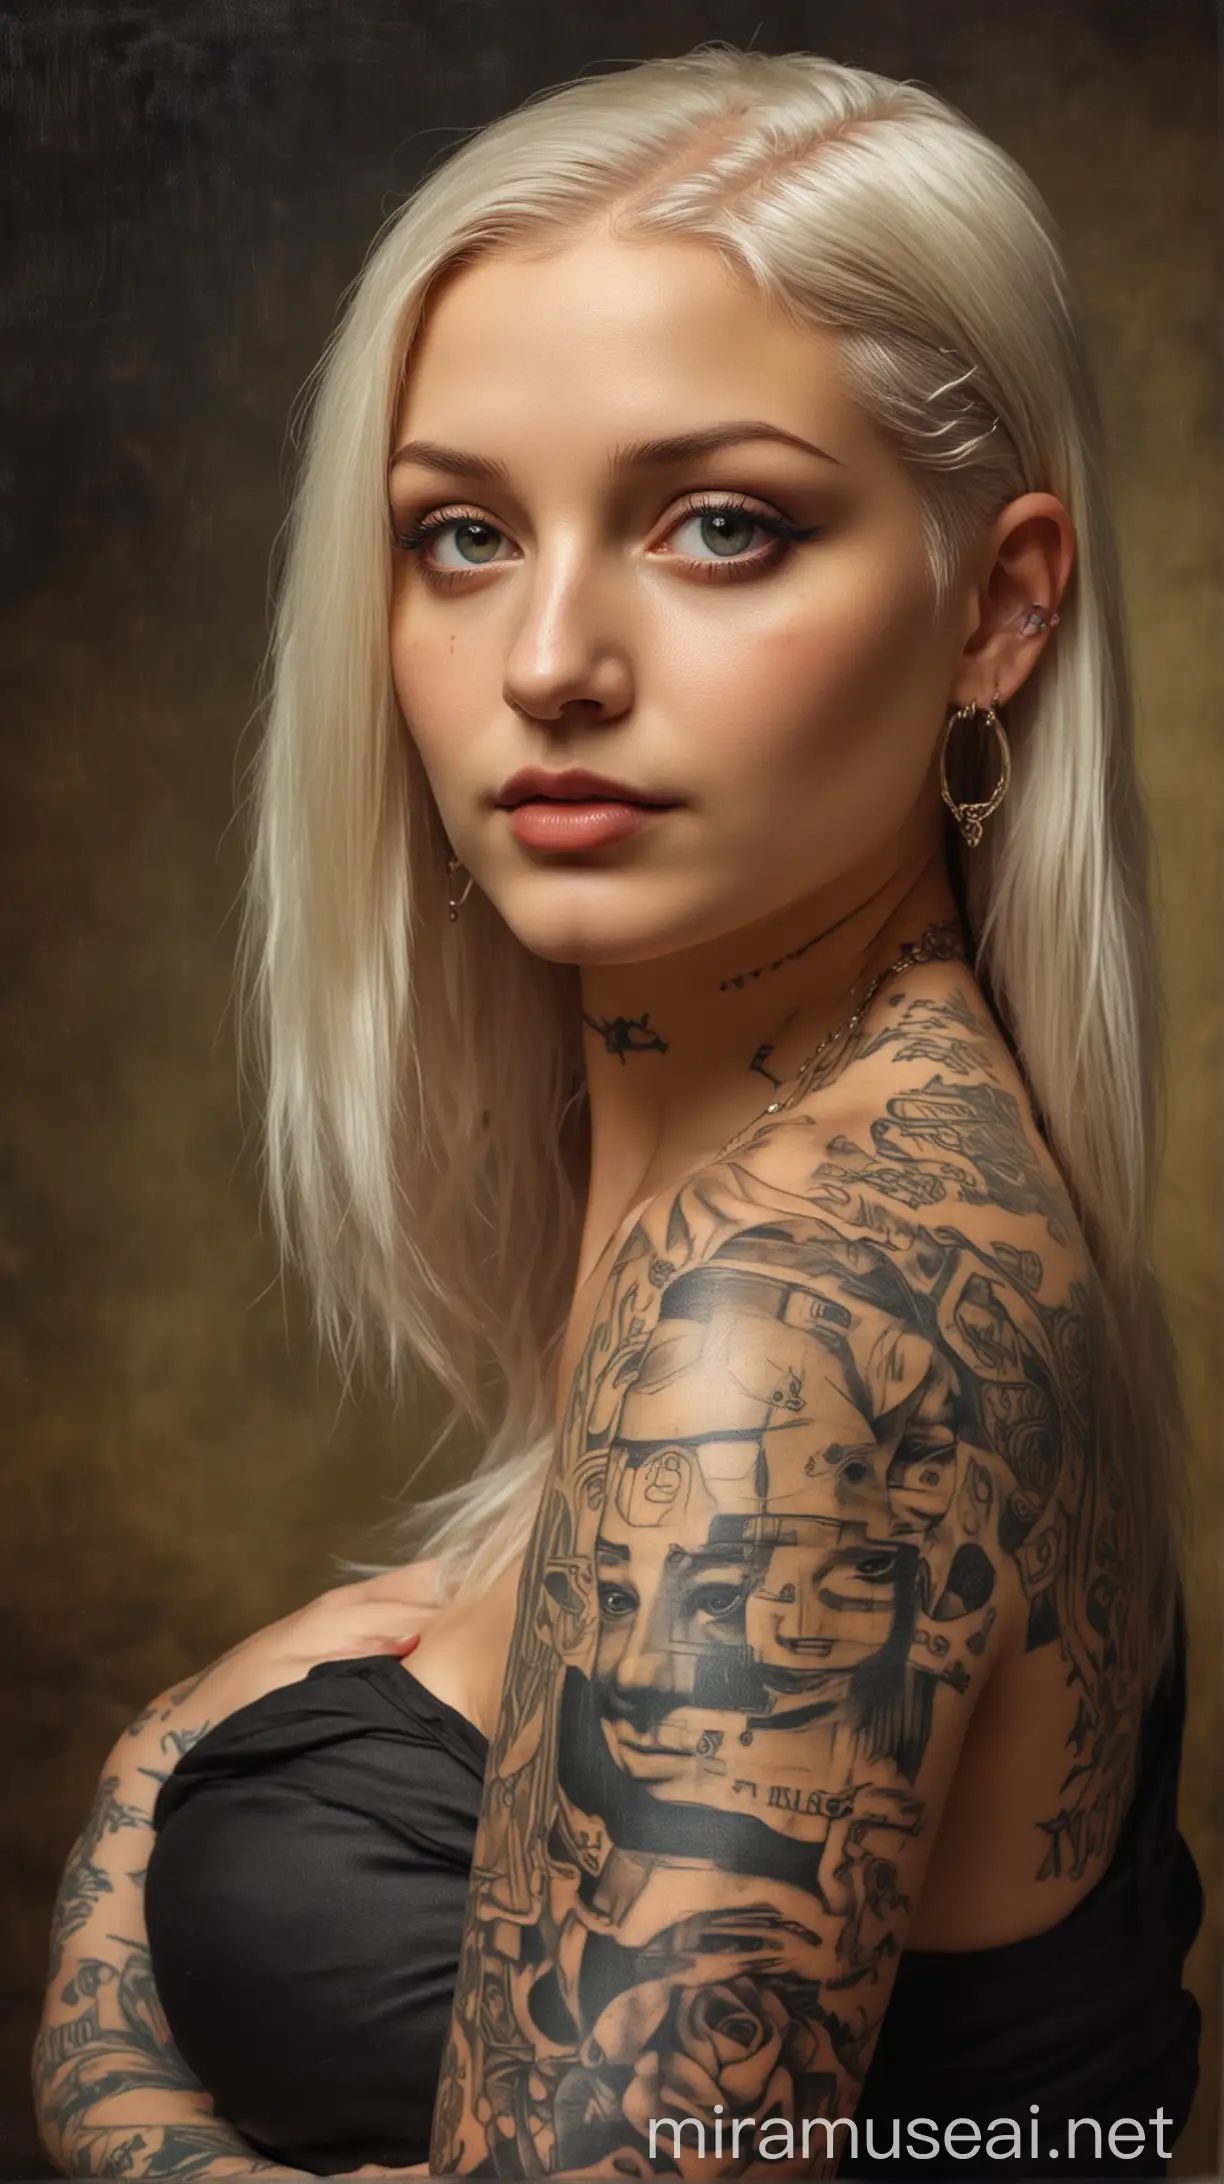 Classical Mona Lisa looking at the future vision of young modern woman with tattoos , piercings and half shaved hair.